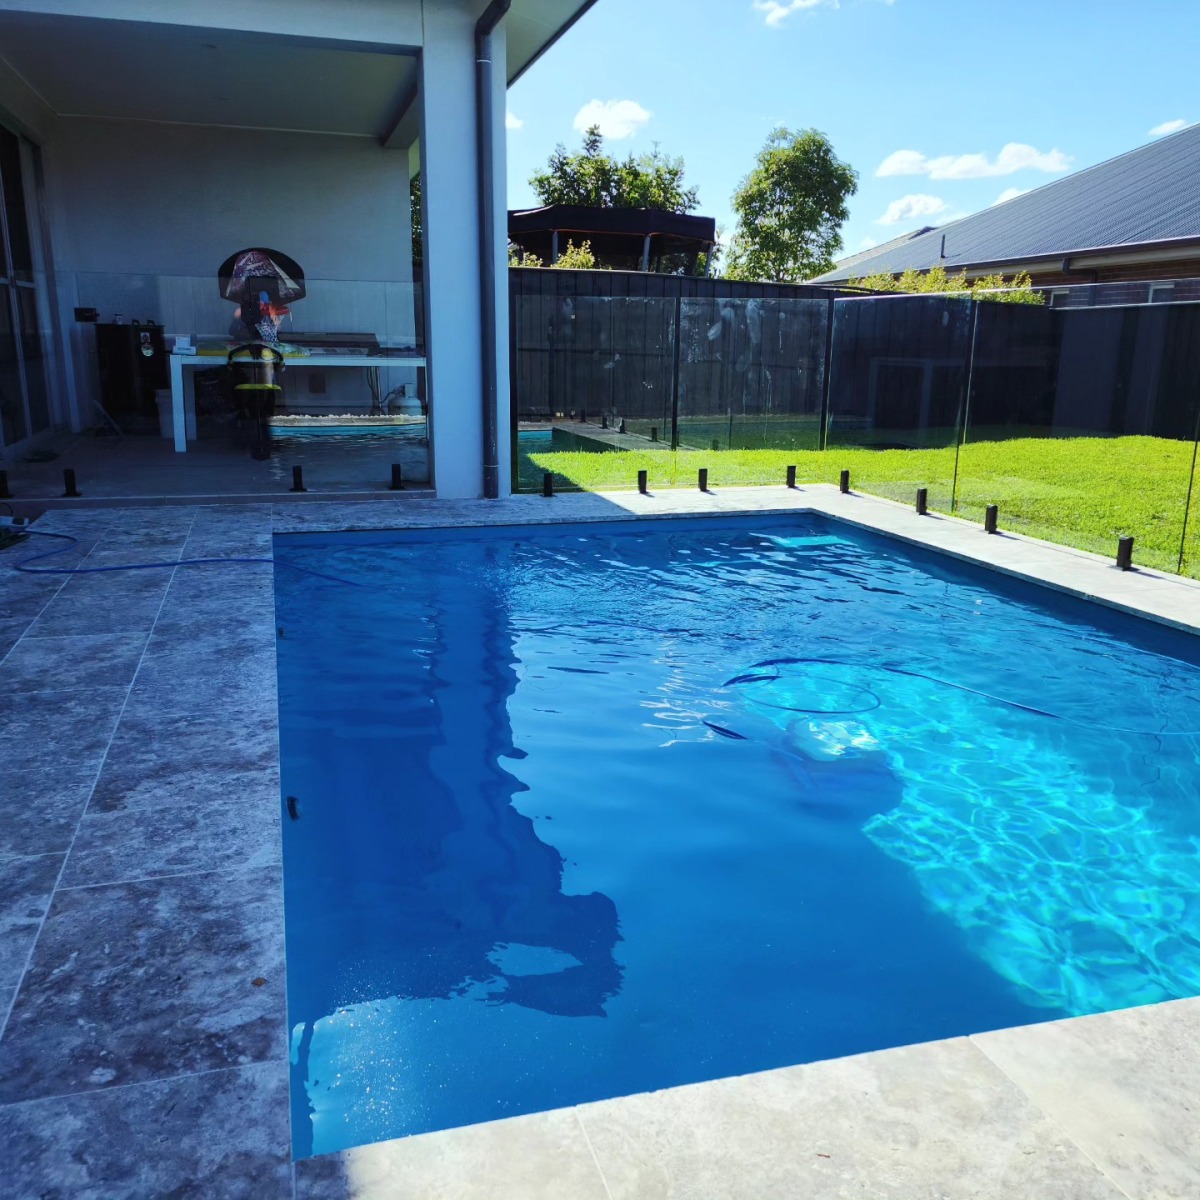 Install The Best Frameless Glass Pool Fencing Sydney In Your Home – Ausglass Fencing